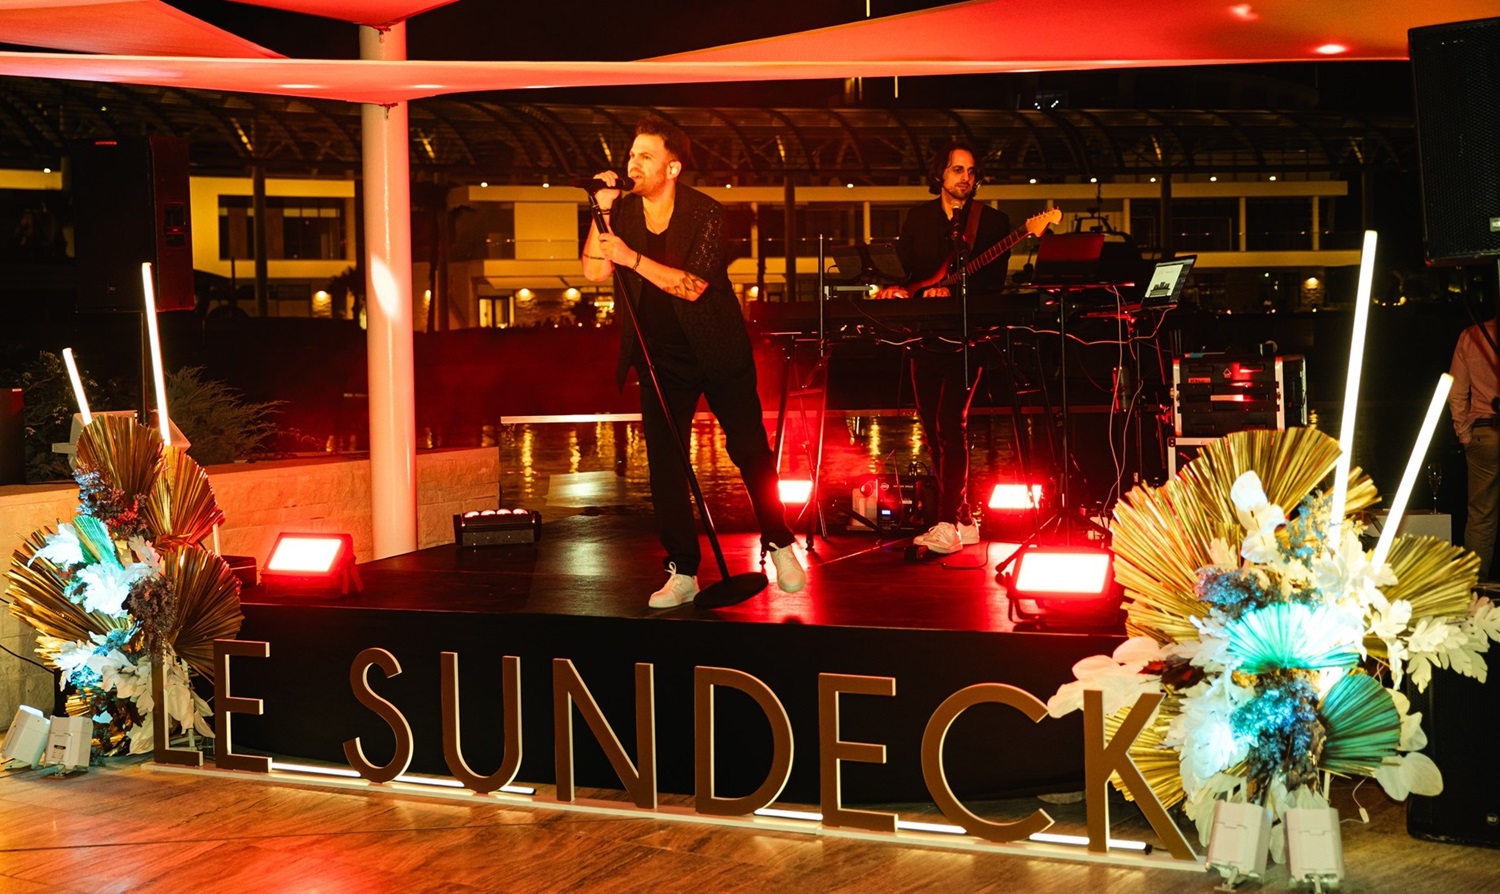 Le Sundeck Robuchon: Το εντυπωσιακό Grand Opening Summer Party